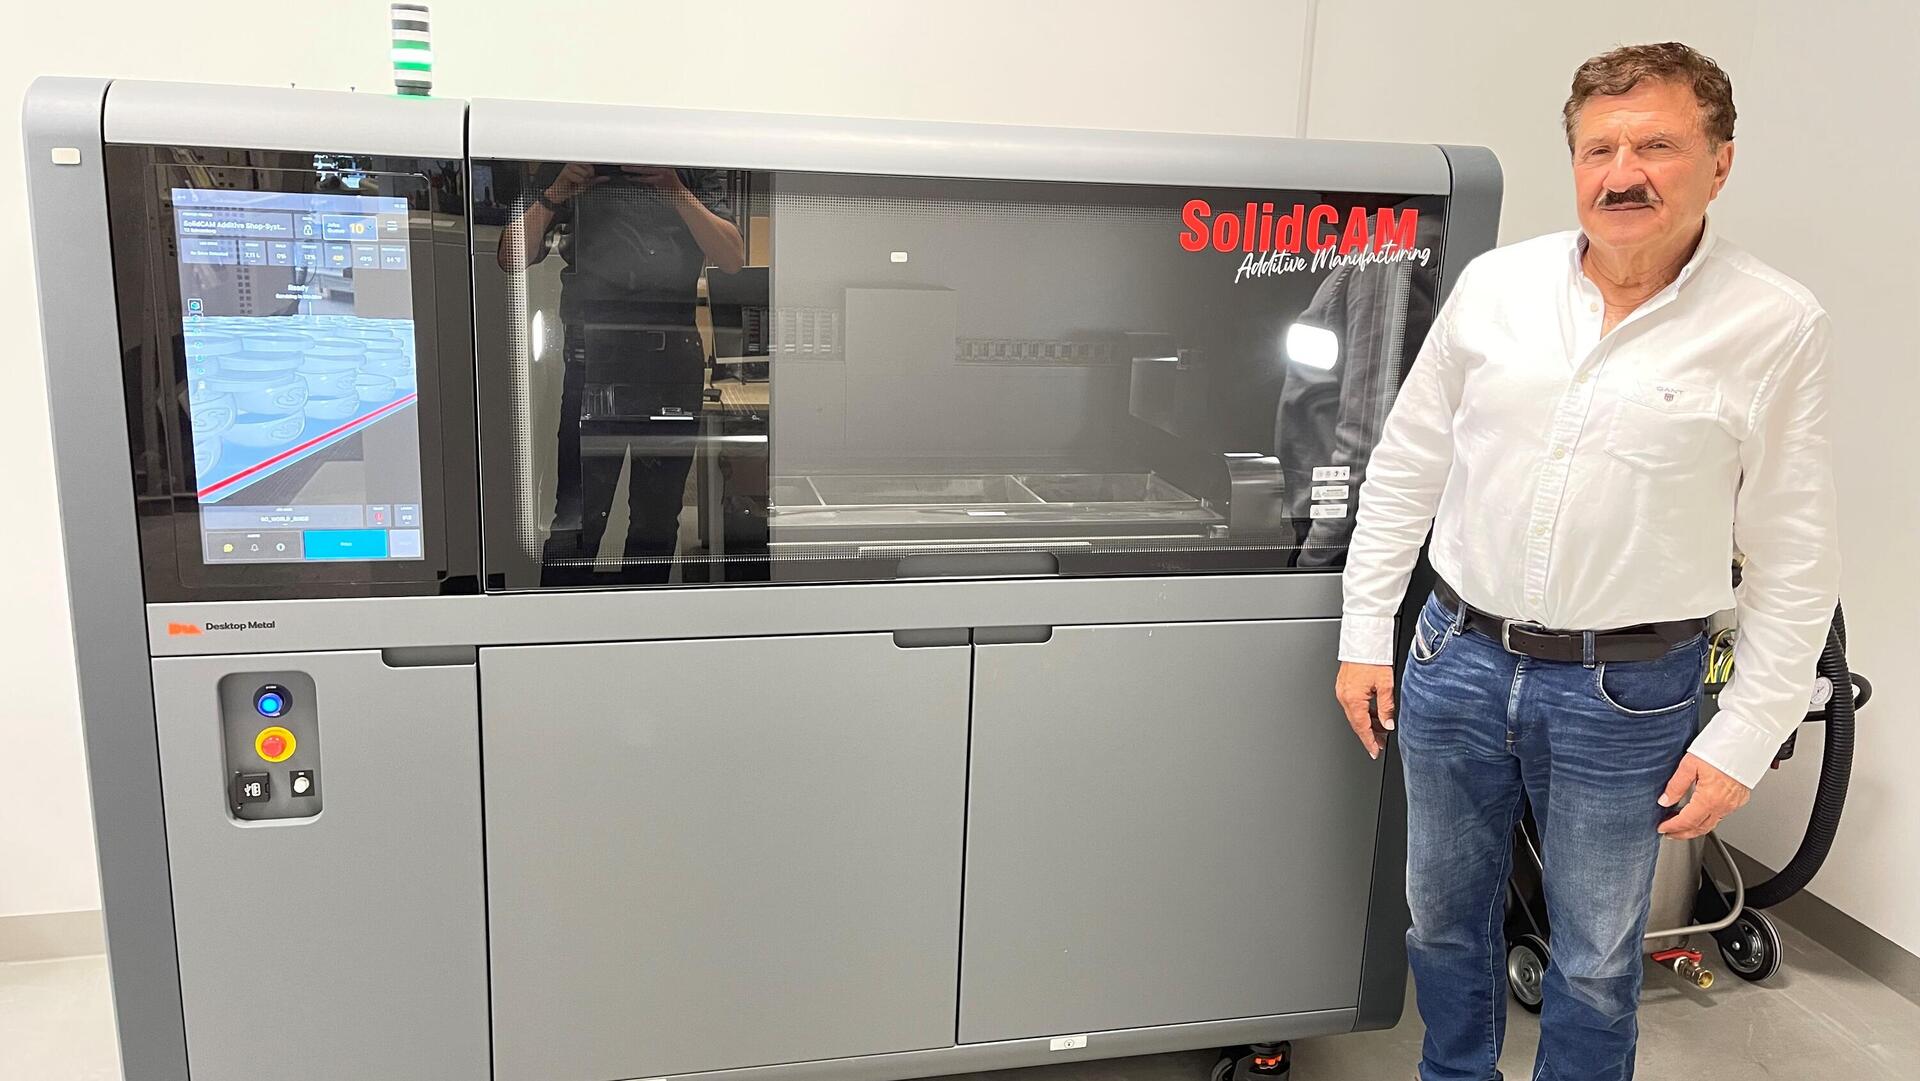 Dr. Emil Somekh stands next to a Desktop Metal Shop system, at the SolidCAM technology center in Germany 